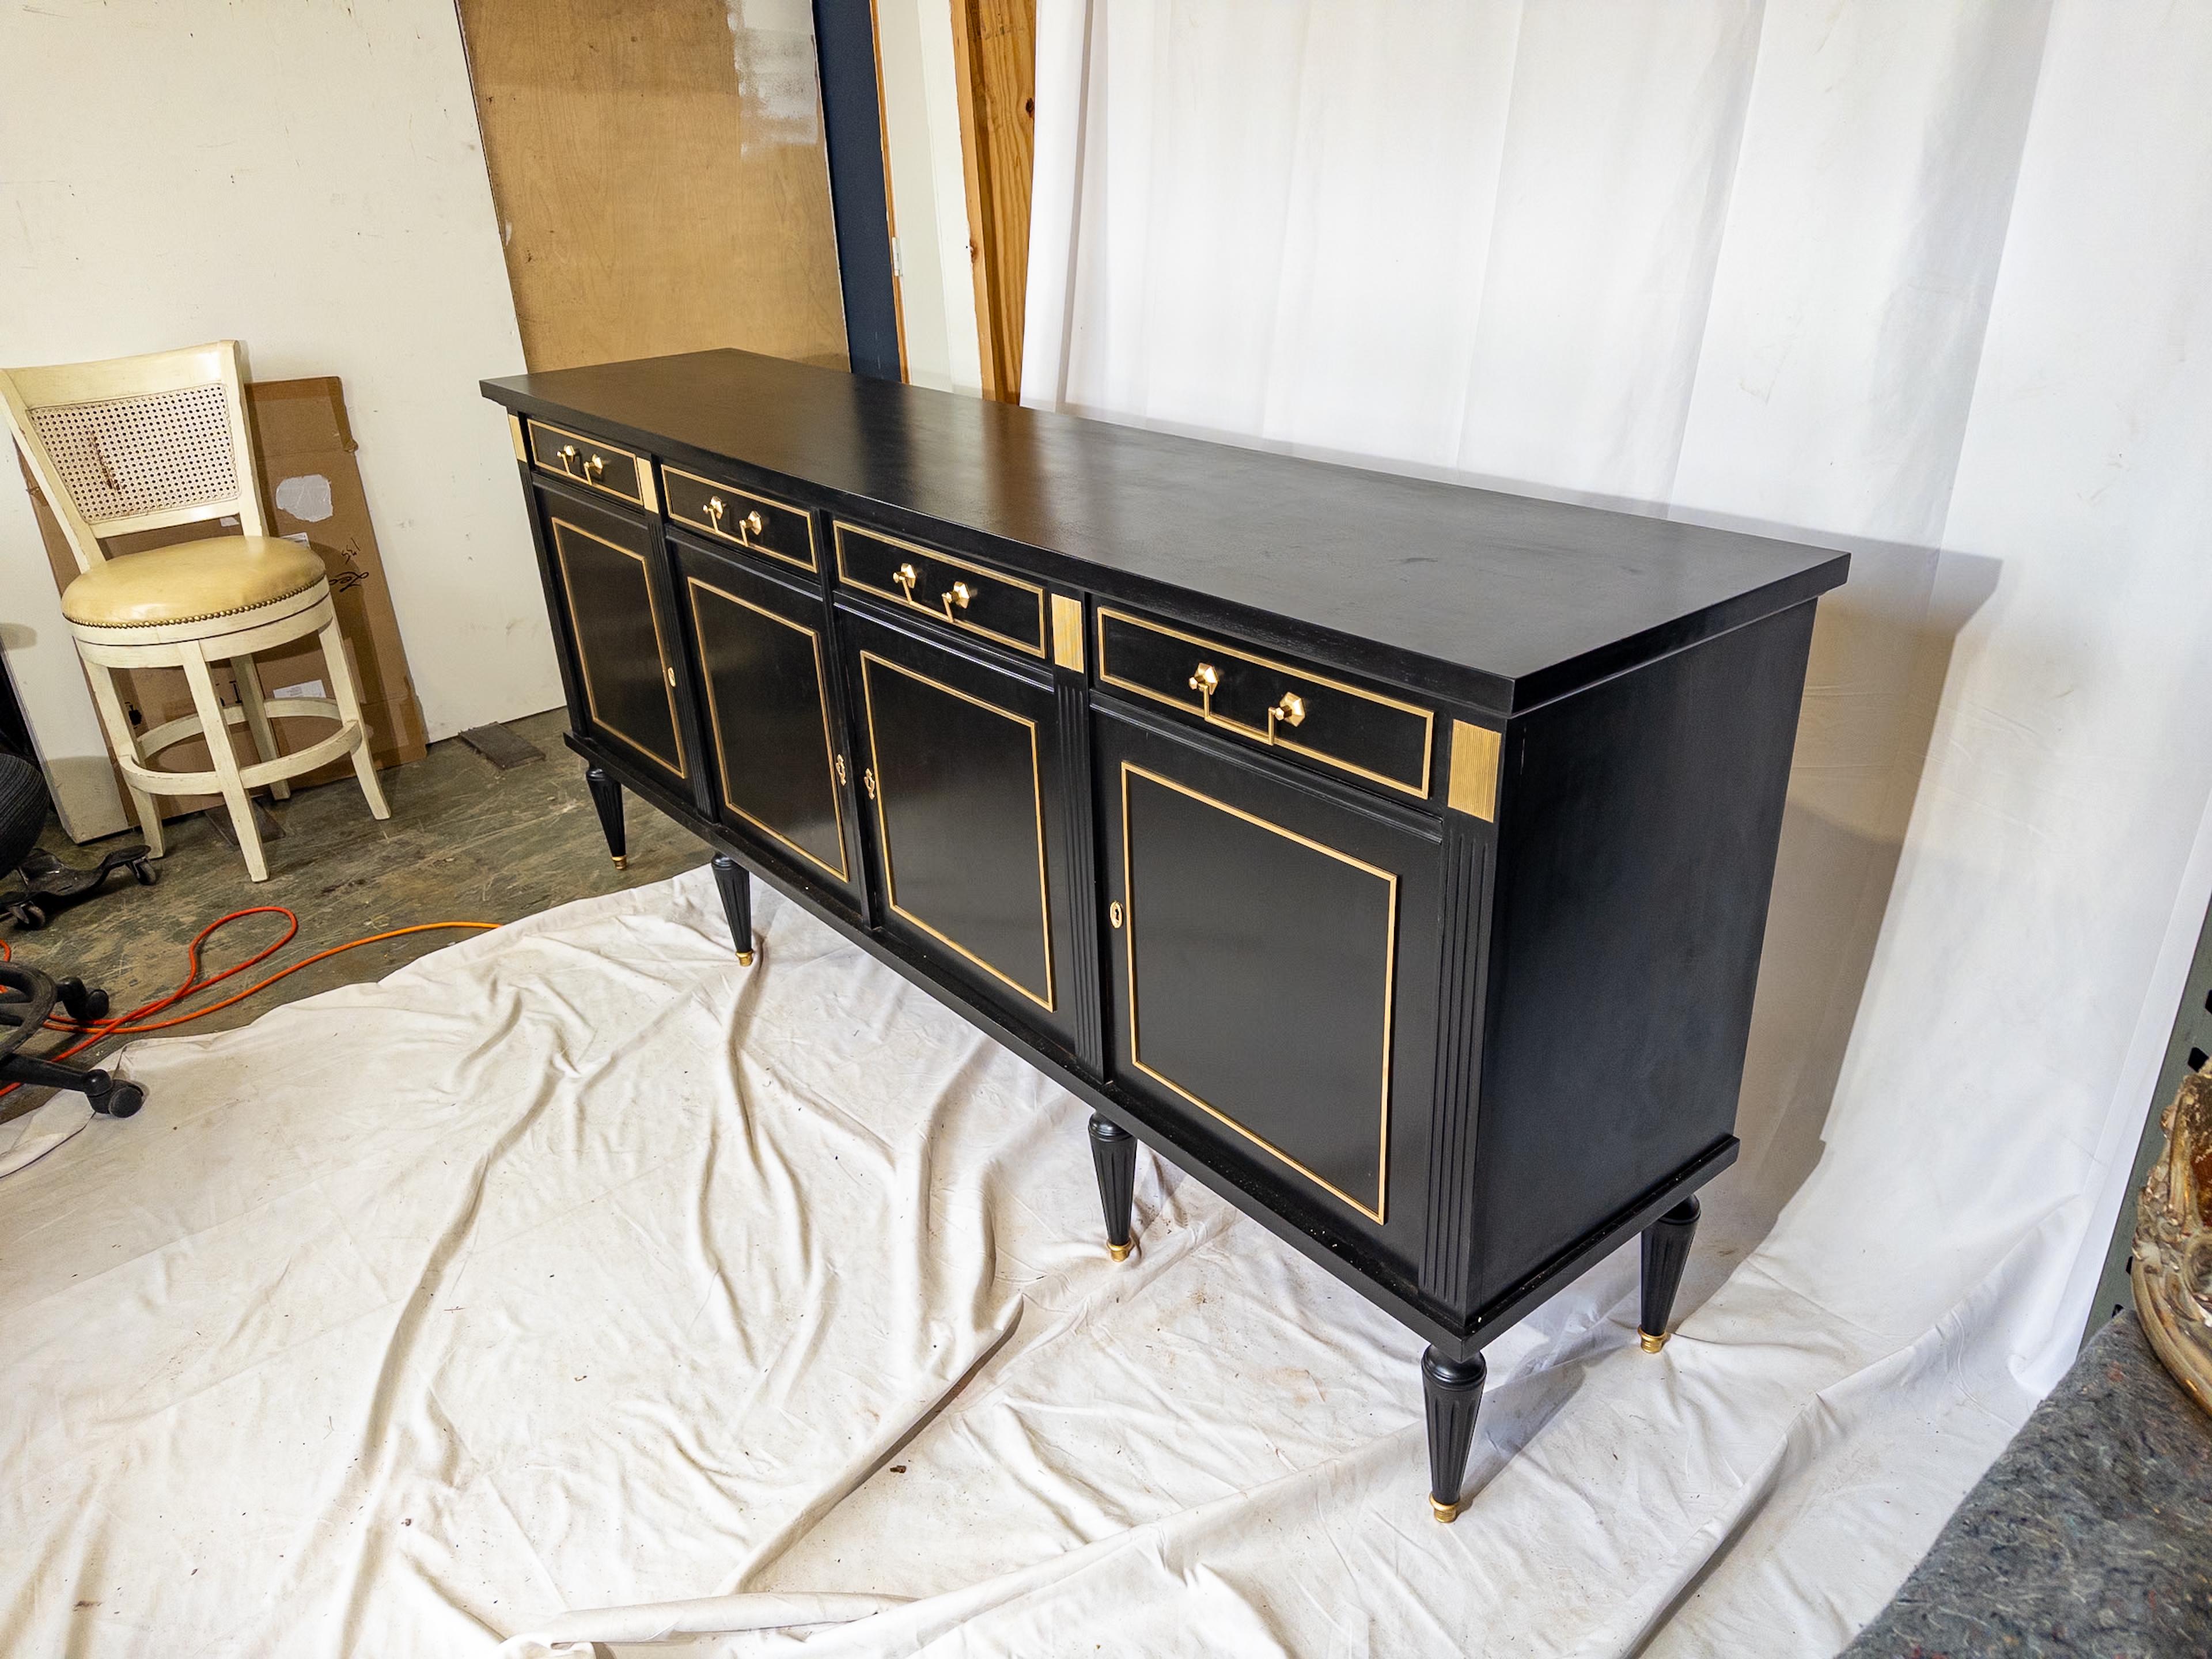 Step into the timeless elegance of the early 20th century with the Louis XVI Style Sideboard, a striking piece that exudes sophistication and grandeur. Painted in a sleek black finish, its surface gleams with an air of refined luxury, enhanced by